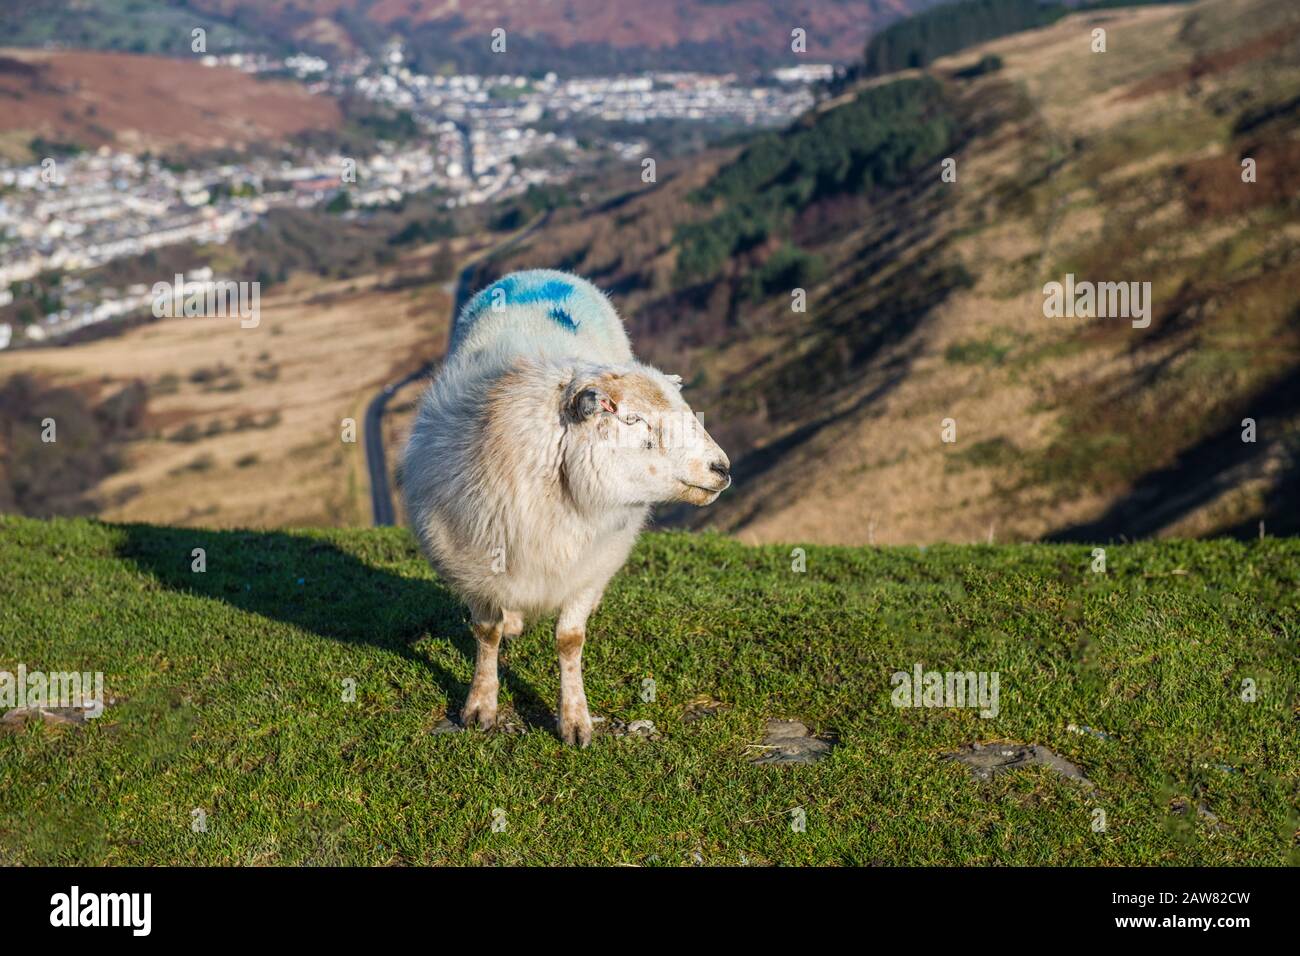 A landscape mostly featuring a sheep on the Bwlch y Clawdd pass between the Ogmore and Rhondda valleys on a sunny February day. Sheep are everywhere! Stock Photo